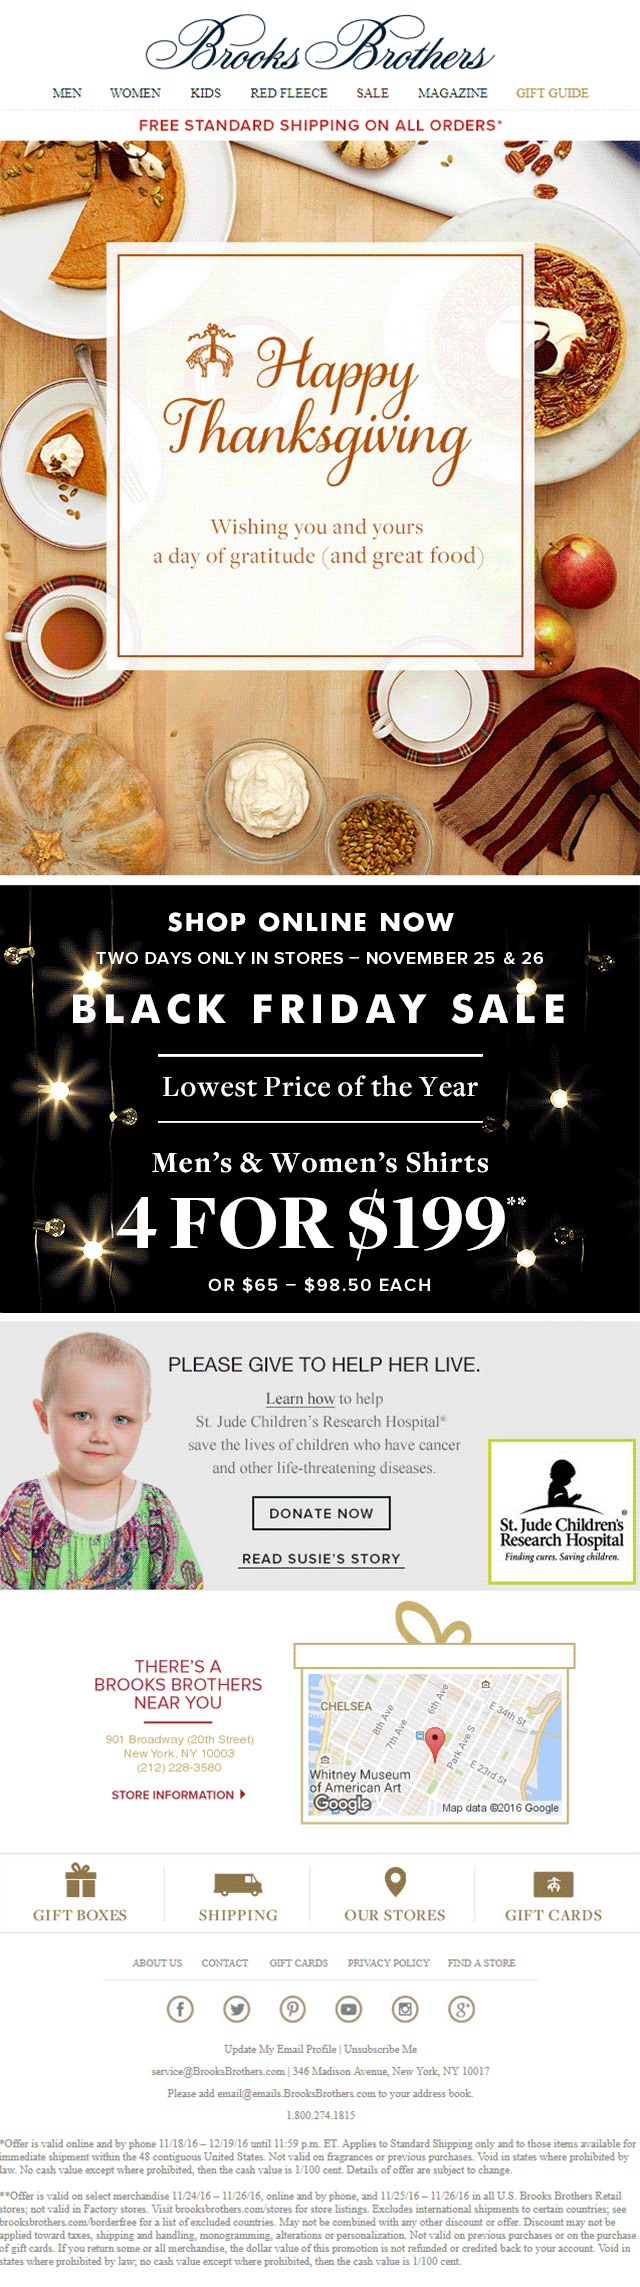 Brooks Brothers_thanksgiving email